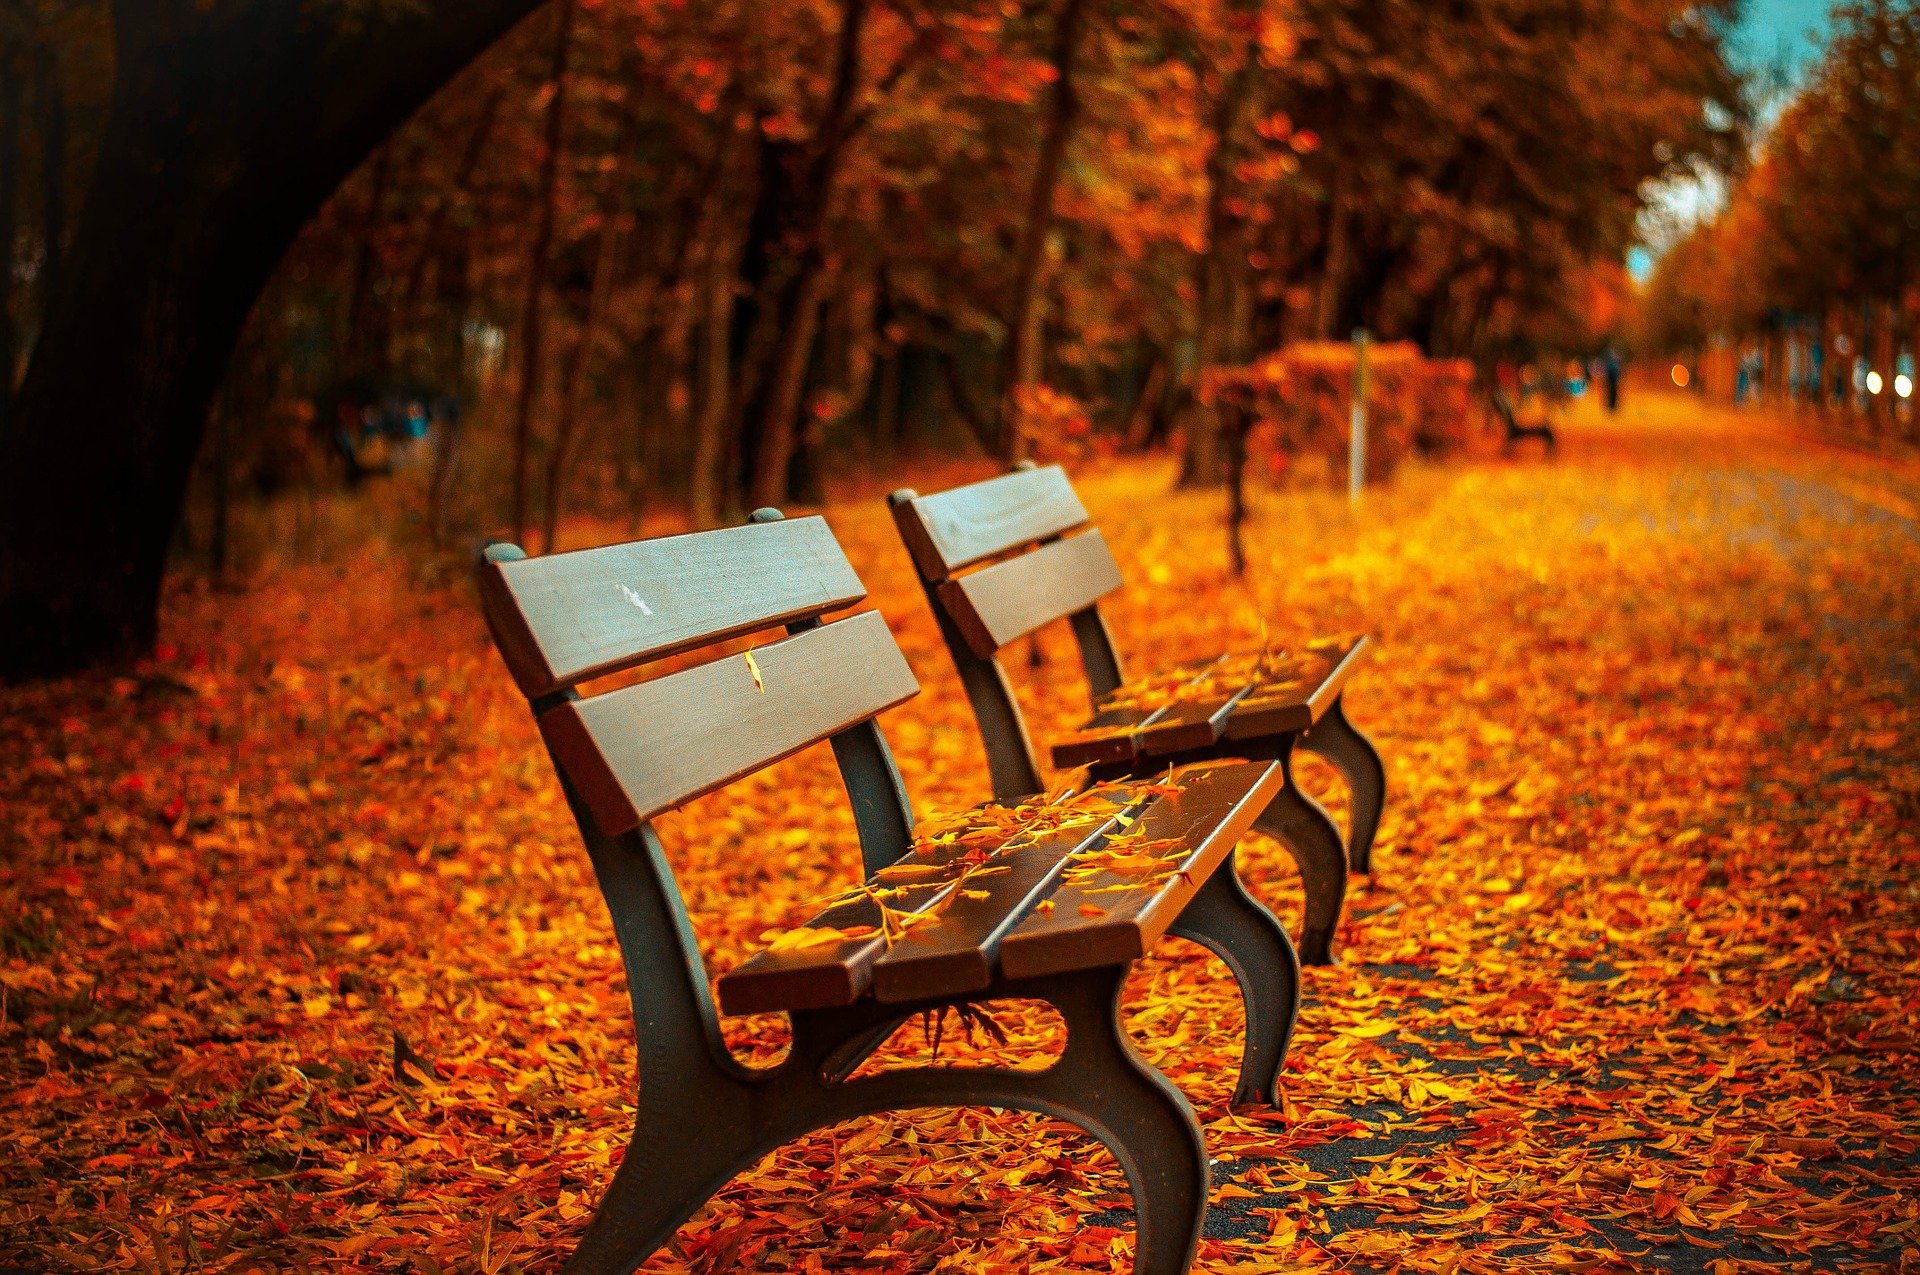 A picture of benches at a park during the Autumn season | Source: Pixabay 